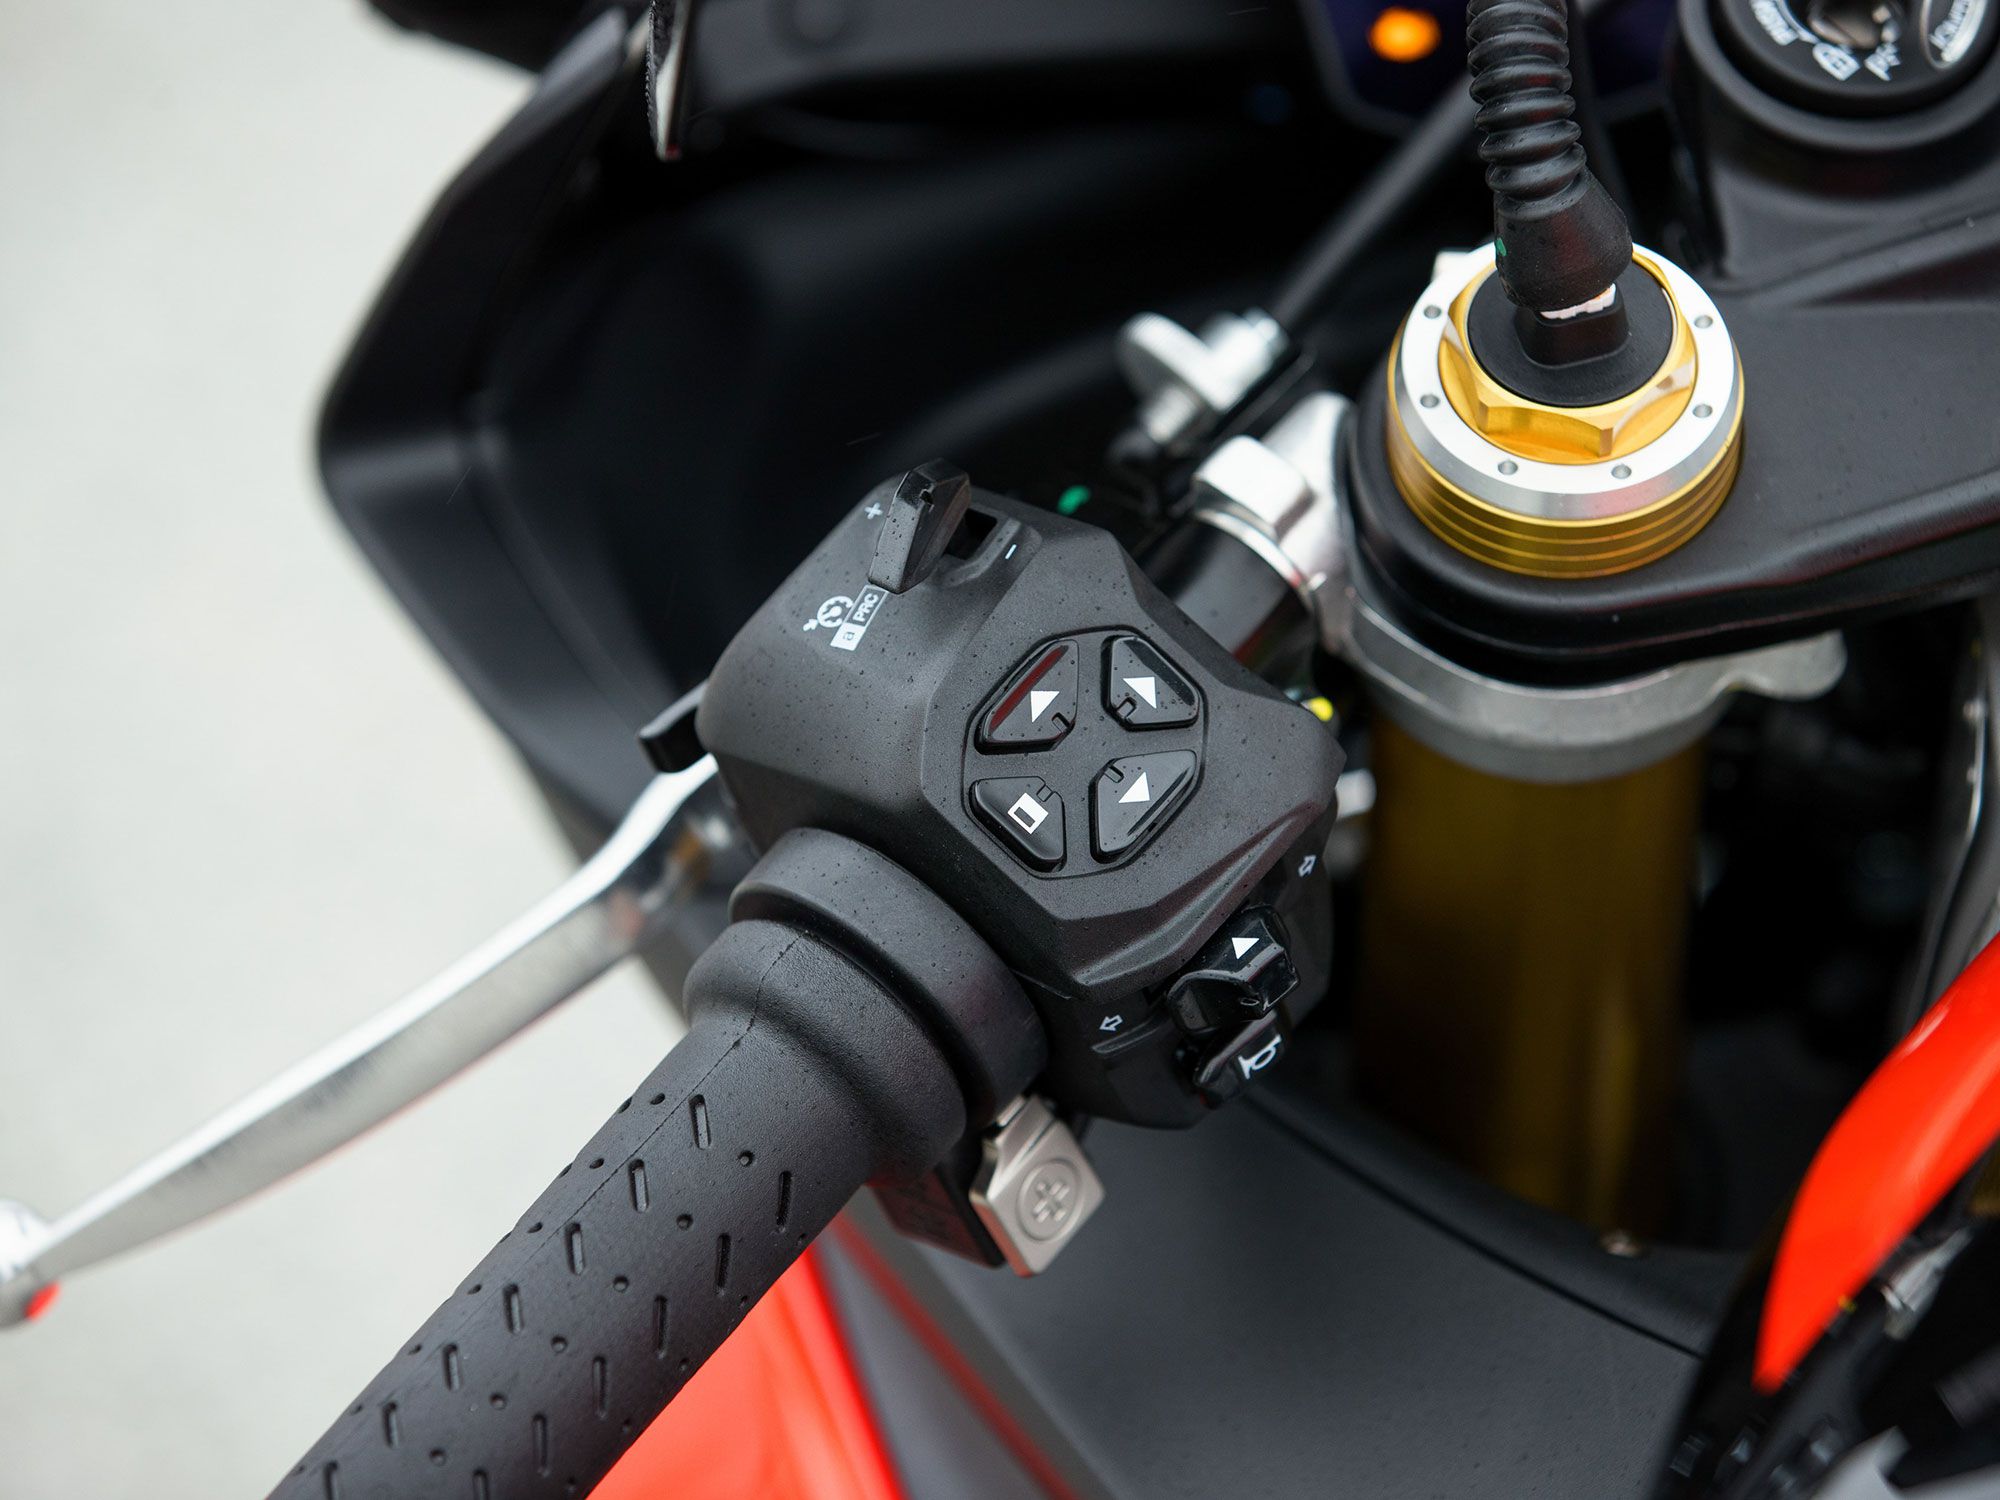 The electronics are manipulated through this control interface. It’s easy to use and offers pleasing tactile function with gloves. We also value the ability to adjust traction control, on the fly, using the bottom thumb and index finger operated buttons.